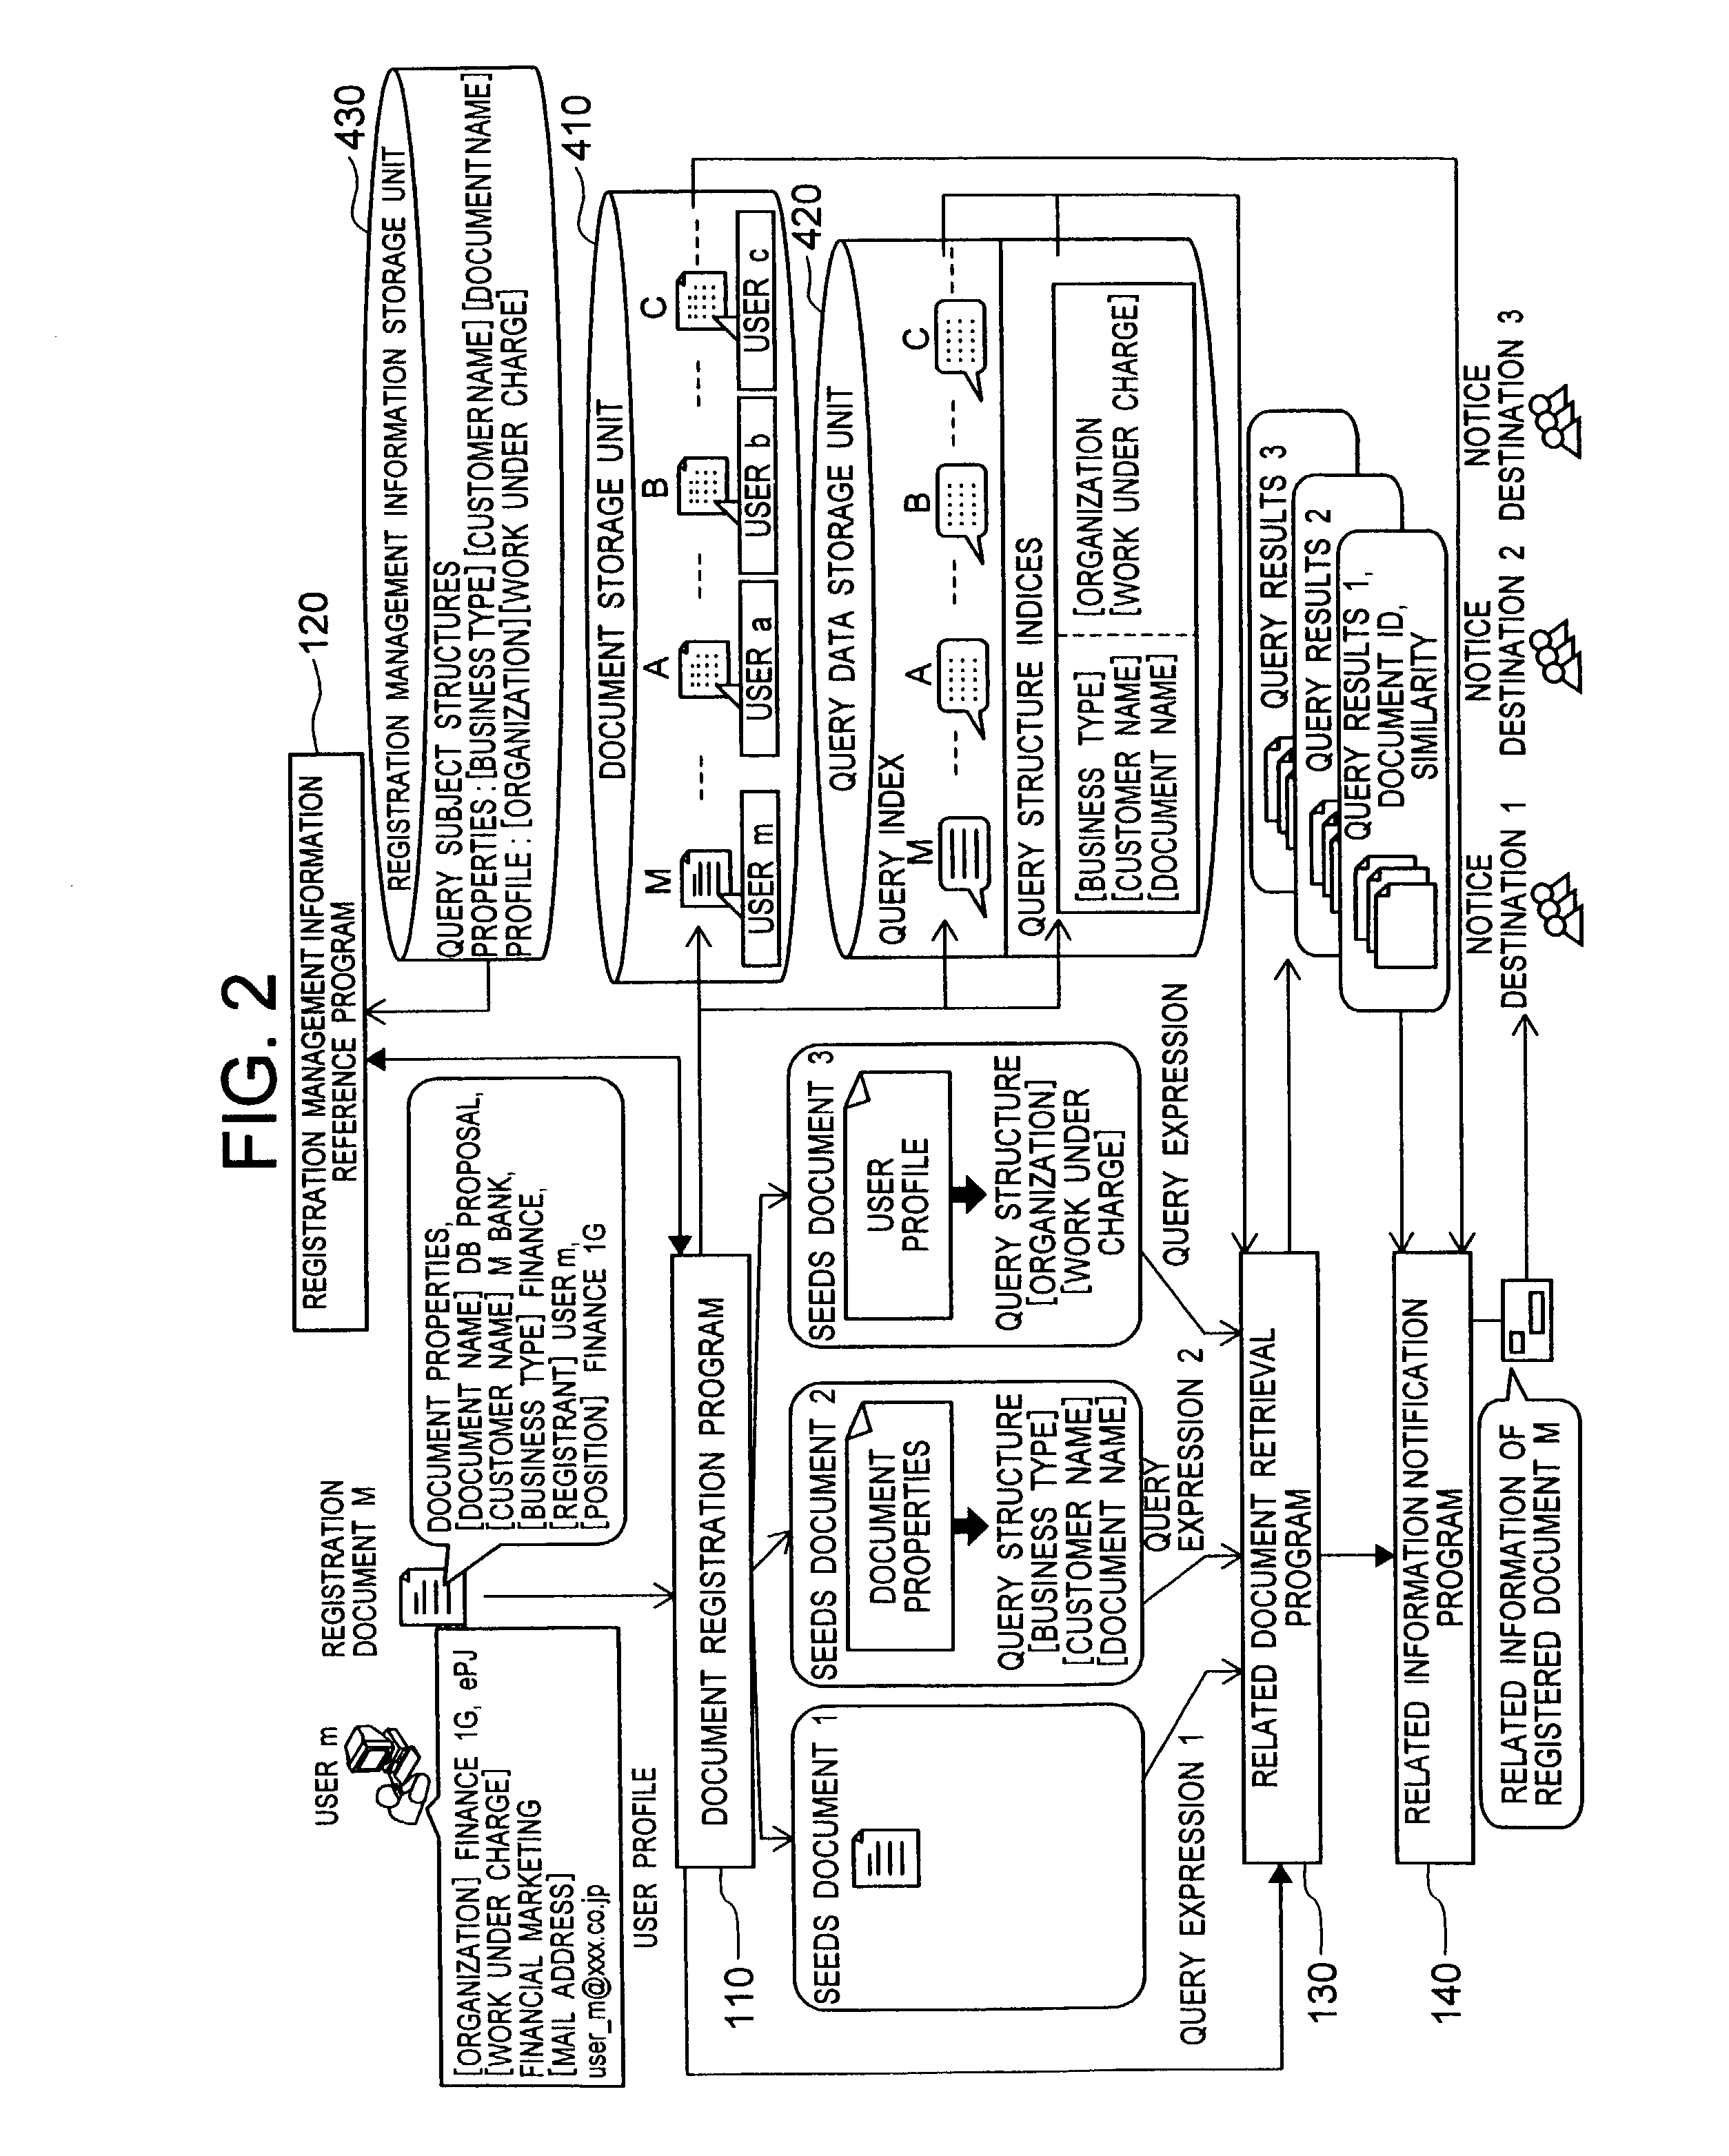 Method and apparatus for document information management